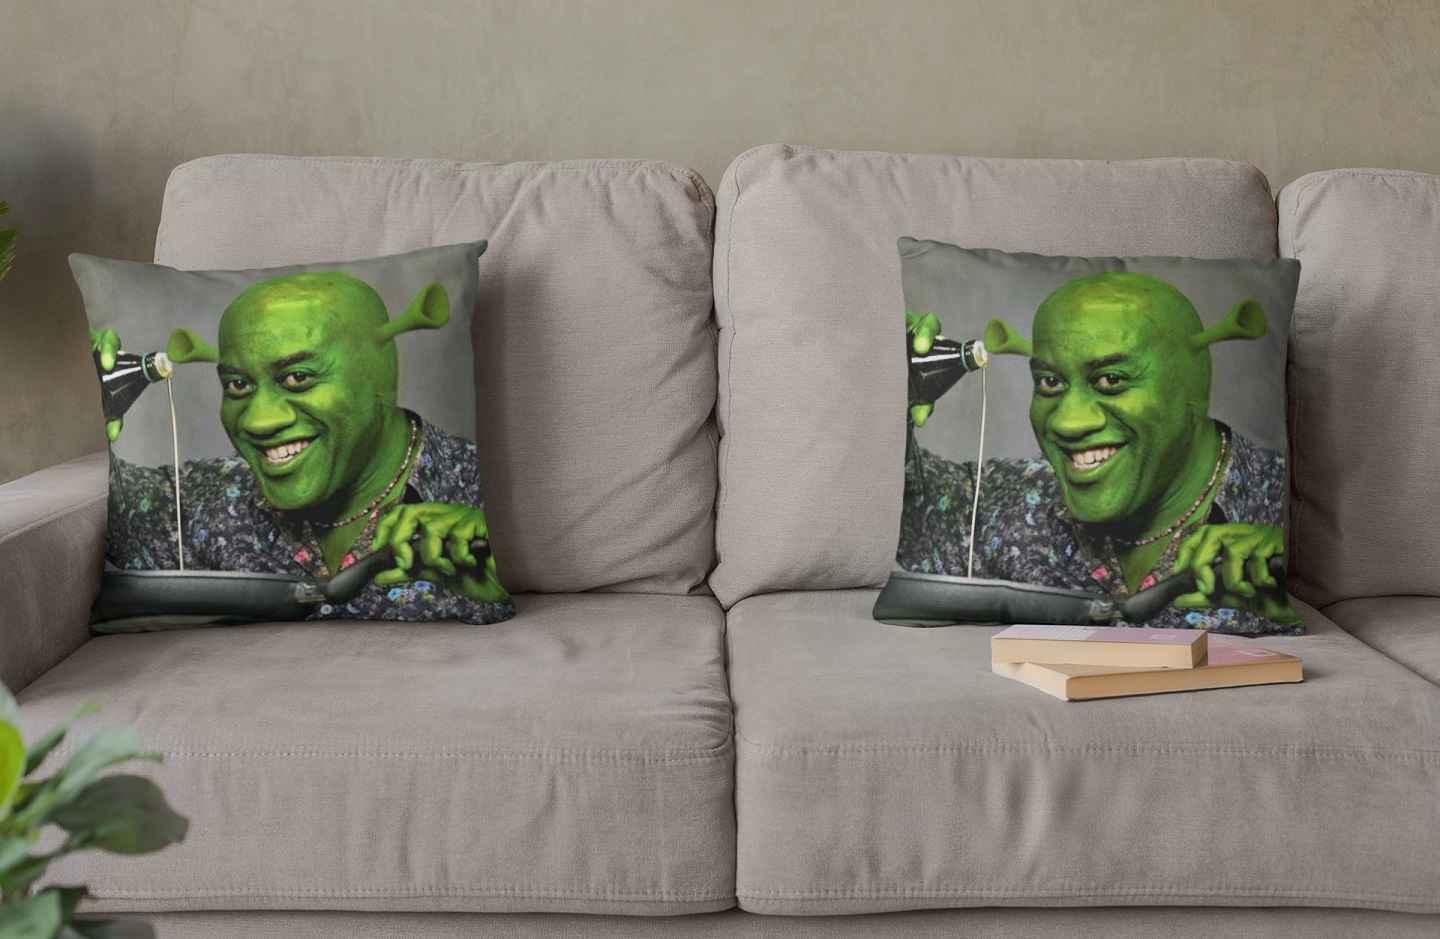 Two Ainsley Harriott Shrek throw pillows positioned at opposite ends of a sofa.